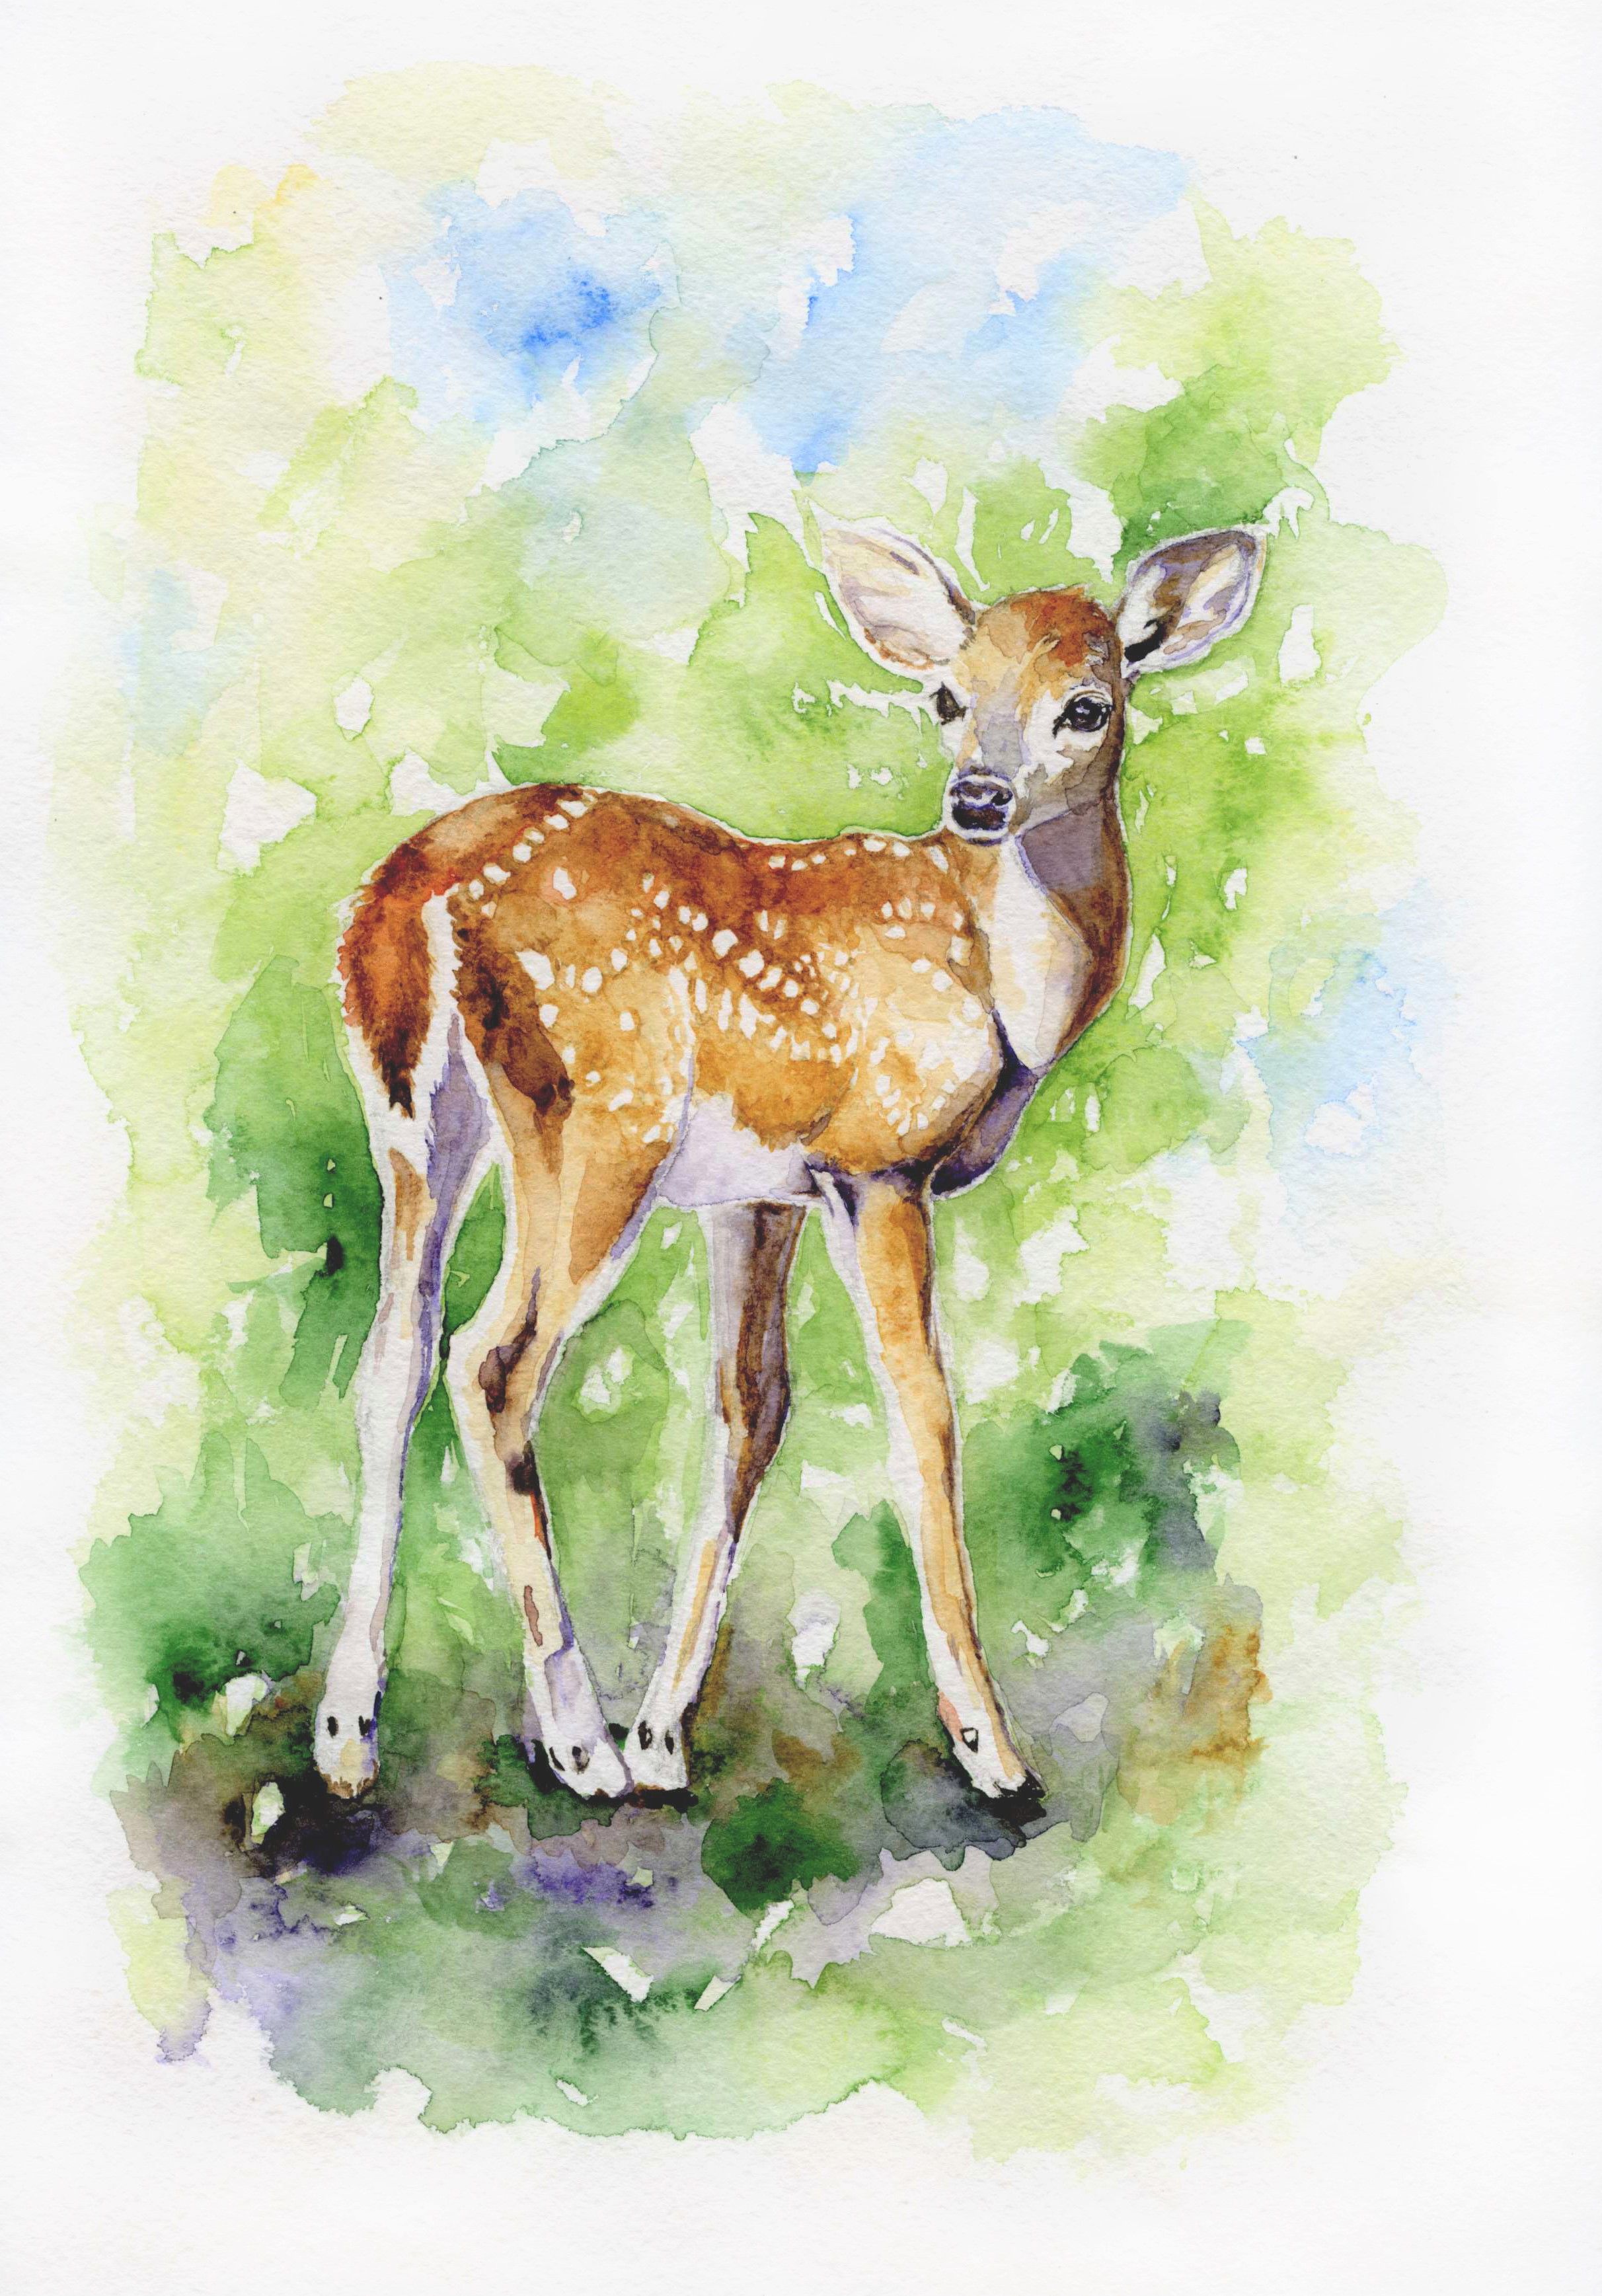 10 Cute Animal Watercolor Paintings in 2020 | Artisticaly - Inspect the  Artist Inside You!